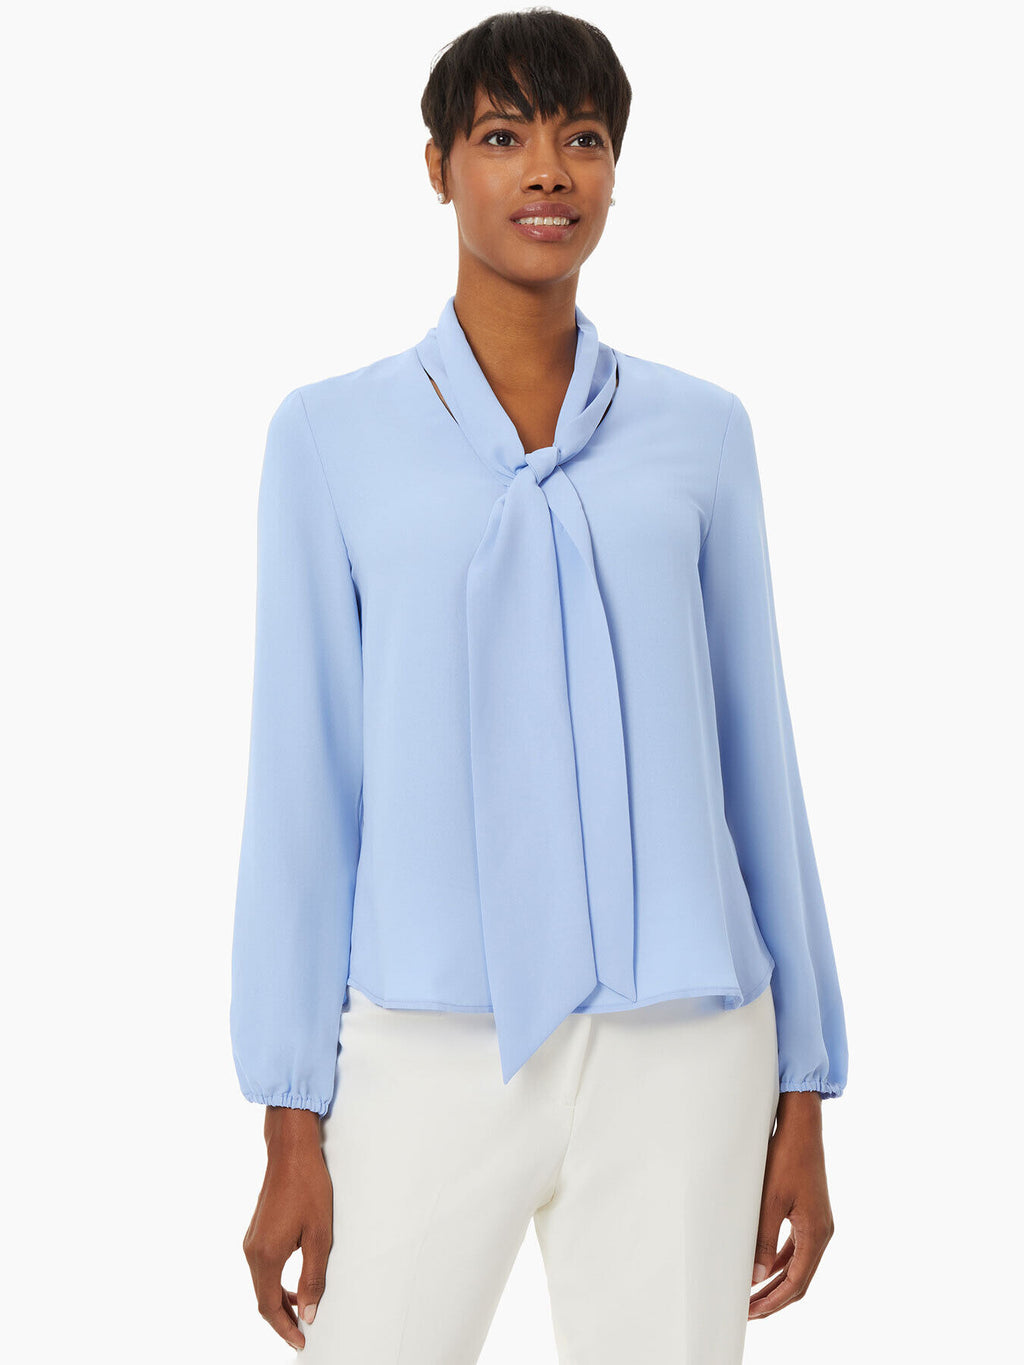 Cloud Blouse with Long Neck Tie by TONET – The Perfect Provenance